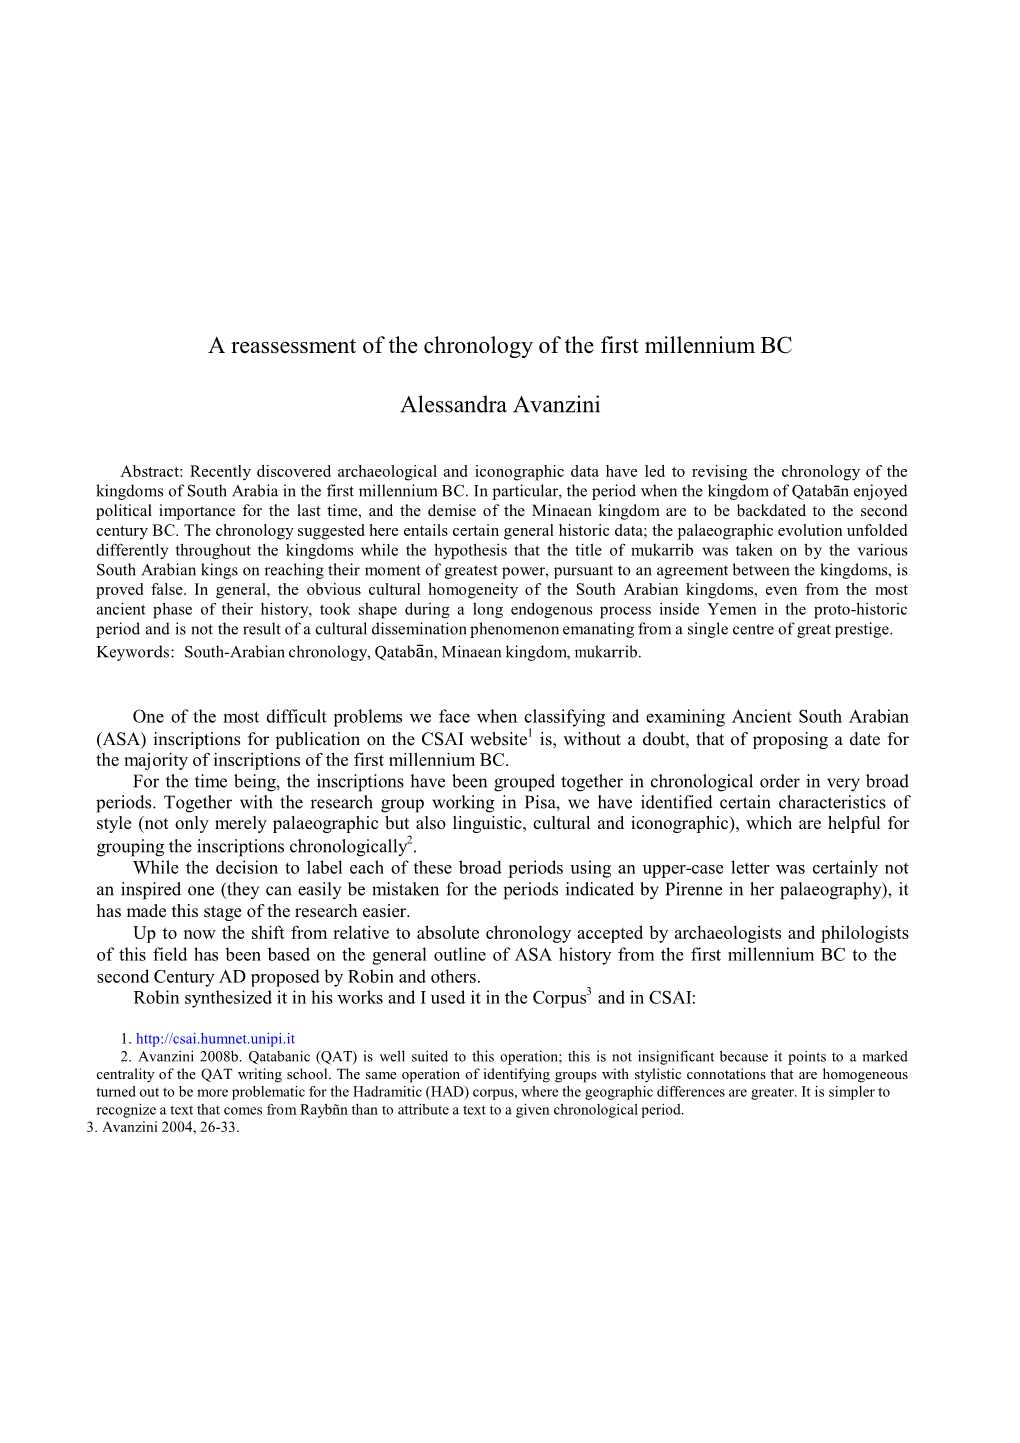 A Reassessment of the Chronology of the First Millennium BC Alessandra